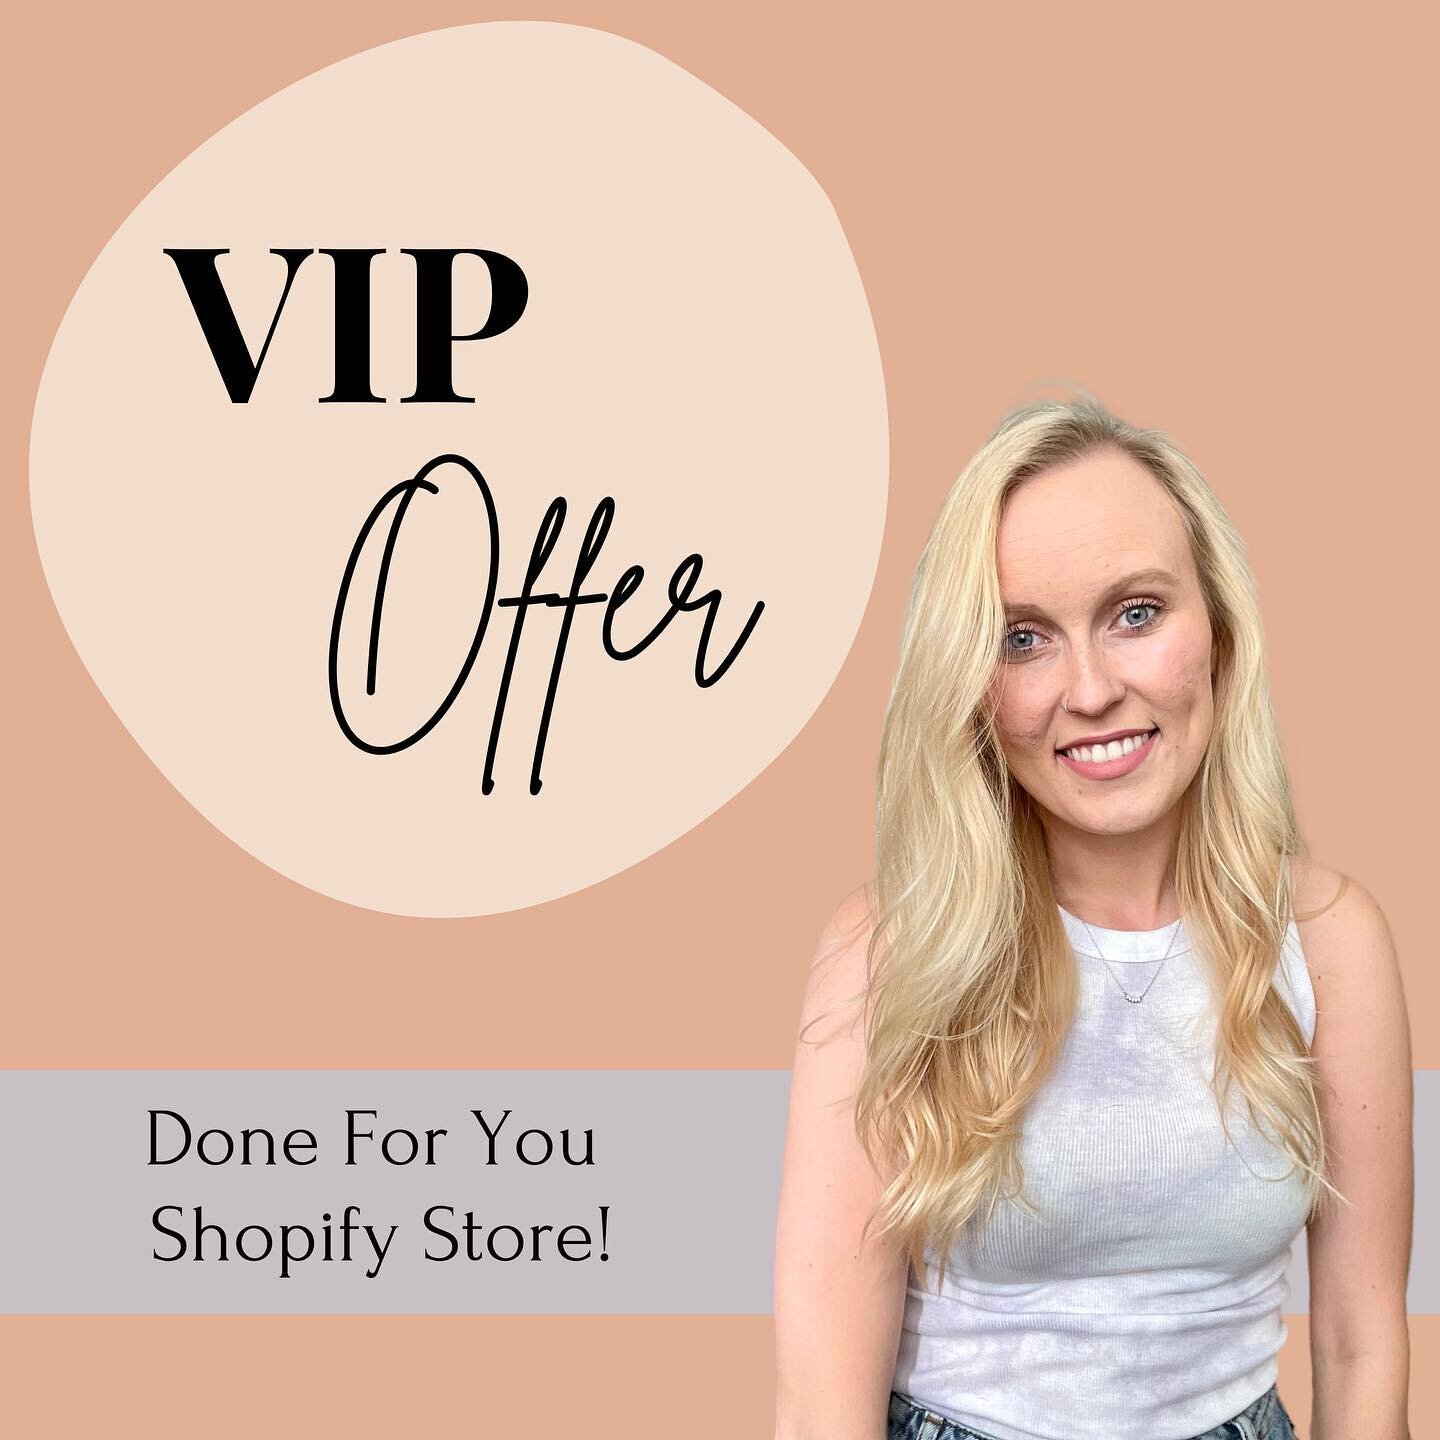 Having your very own e-commerce shop is closer than you think✨

🚨Introducing my brand new VIP Offer🚨 A Done For You Shopify Store‼️

With this offer I will take your existing Etsy shop and transform it into a Shopify store customized just for you😍